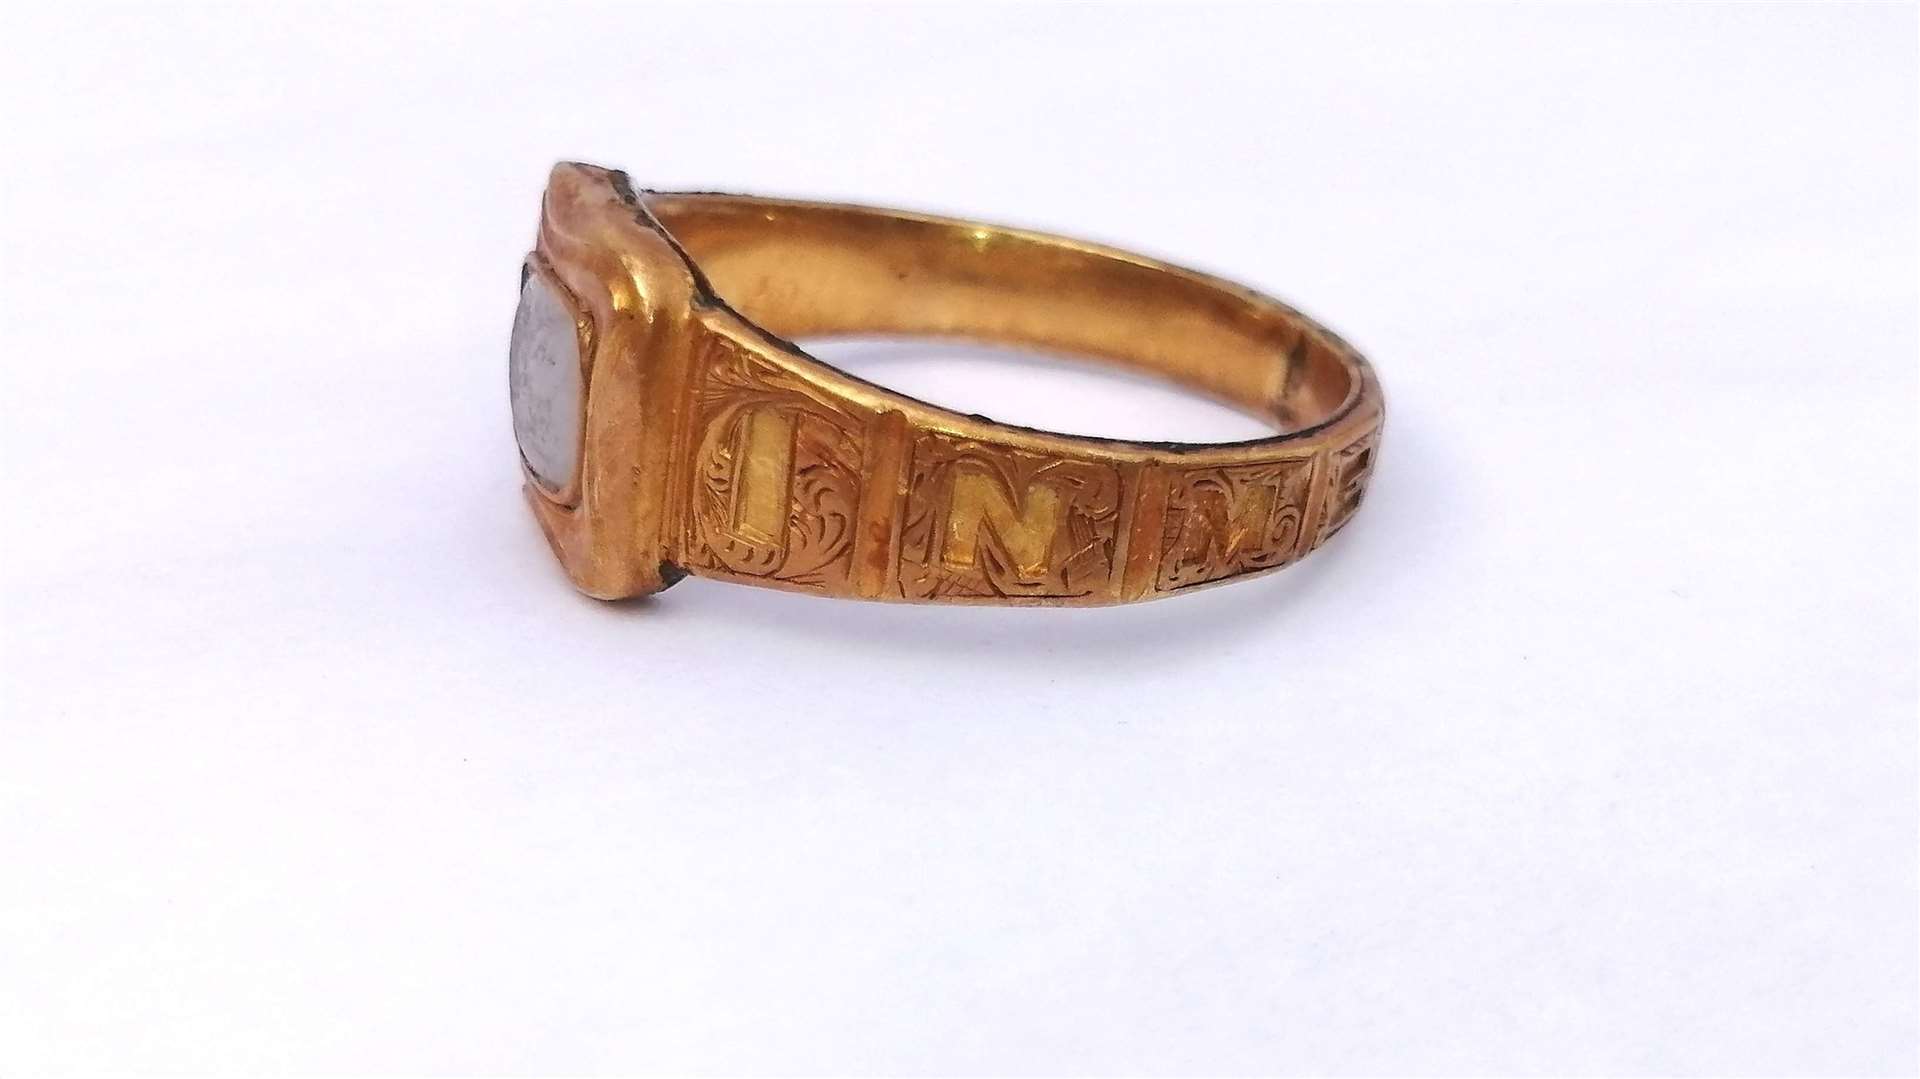 The mourning ring. Picture: Cornell Swart